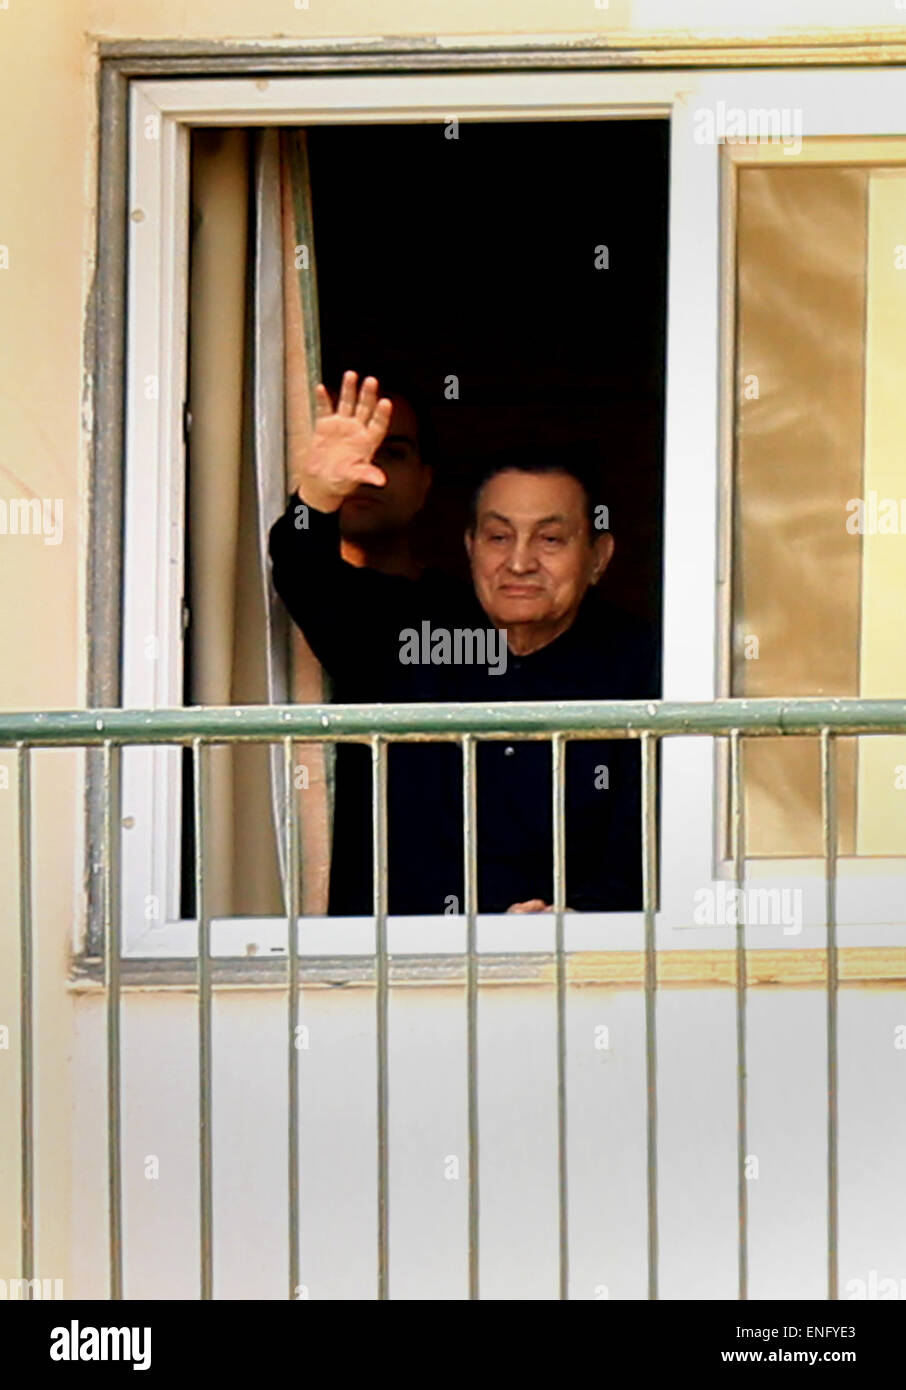 Cairo, Egypt. 5th May, 2015. Former Egyptian President Hosni Mubarak waves to supporters during a celebration to mark his 87th birthday, outside Maadi military hospital, near Cairo on May 5, 2015. An Egyptian legal authority on Monday ruled in favor of former President Hosni Mubarak by allowing him to retain his 'privileges' as former president, a judicial source has said © Amr Sayed/APA Images/ZUMA Wire/Alamy Live News Stock Photo